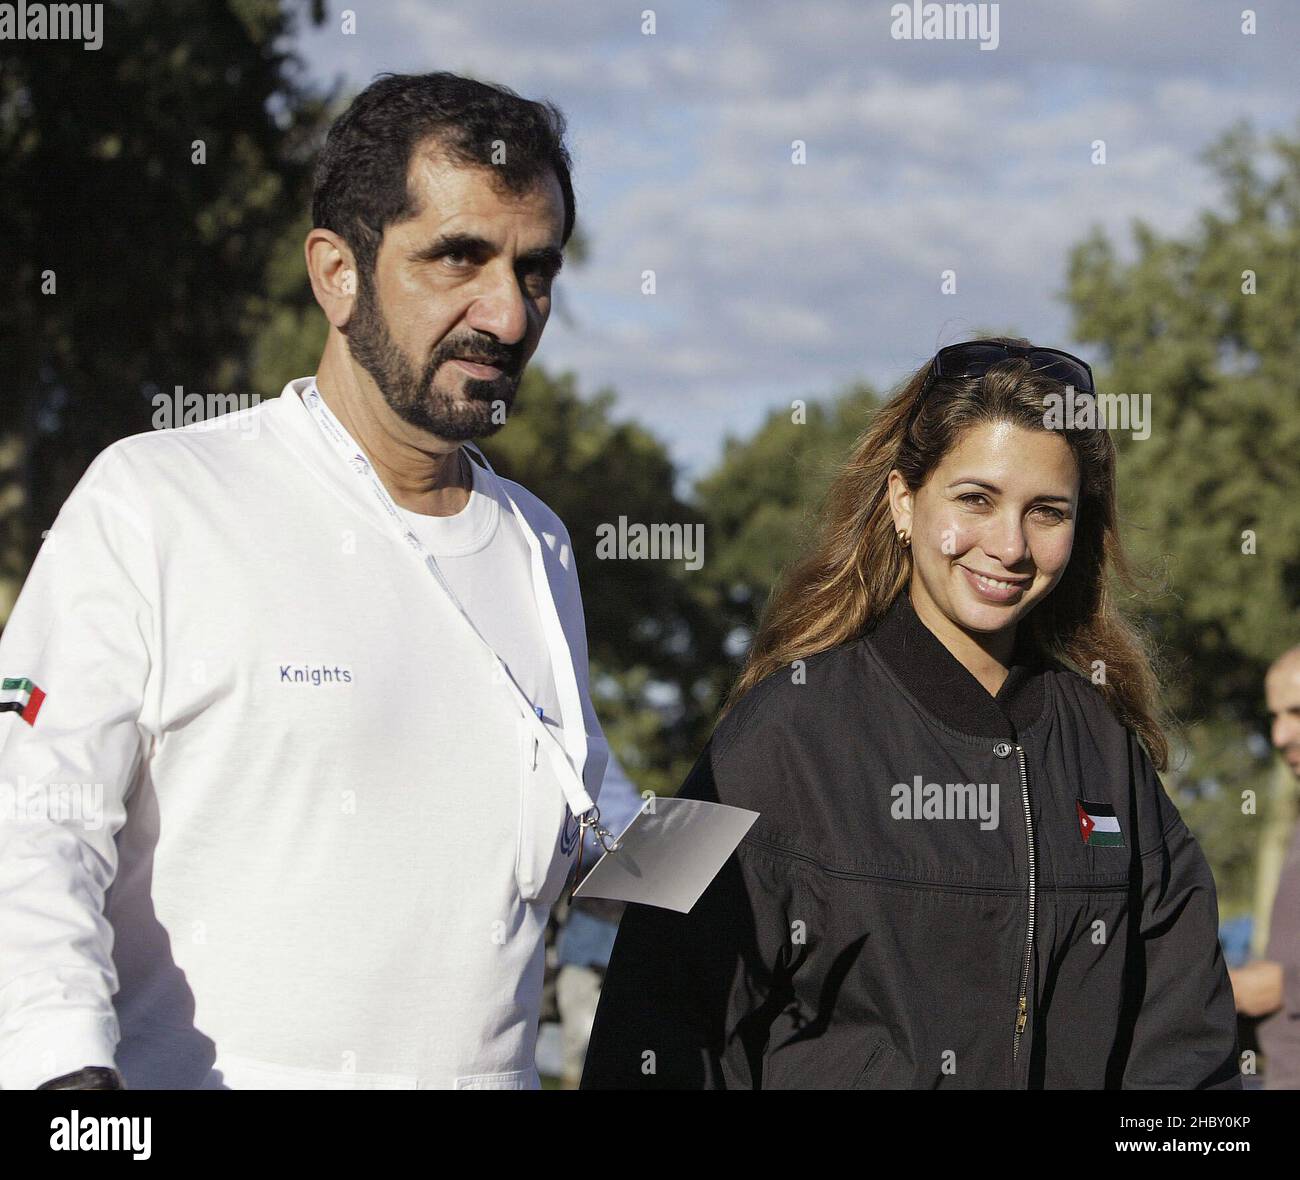 File photo dated August 25, 2005 of Sheikh Mohammed Al Maktoum and his wife princess Haya of Jordan arrive at the Horse Endurance European championship in Compiegne, France. The UK's High Court on Tuesday December 21, 2021, awarded a lump sum settlement of £ 251.5m to Princess Haya Bint Al-Hussain, the 47-year-old daughter of Jordan's former King Hussein. She is the youngest of six wives of Sheikh Mohammed Bin Rashid Al-Maktoum, the multi-billionaire ruler of Dubai, prime minister of the UAE and influential horse-racing owner. The judgment provides Princess Haya with sums to cover the cost of Stock Photo